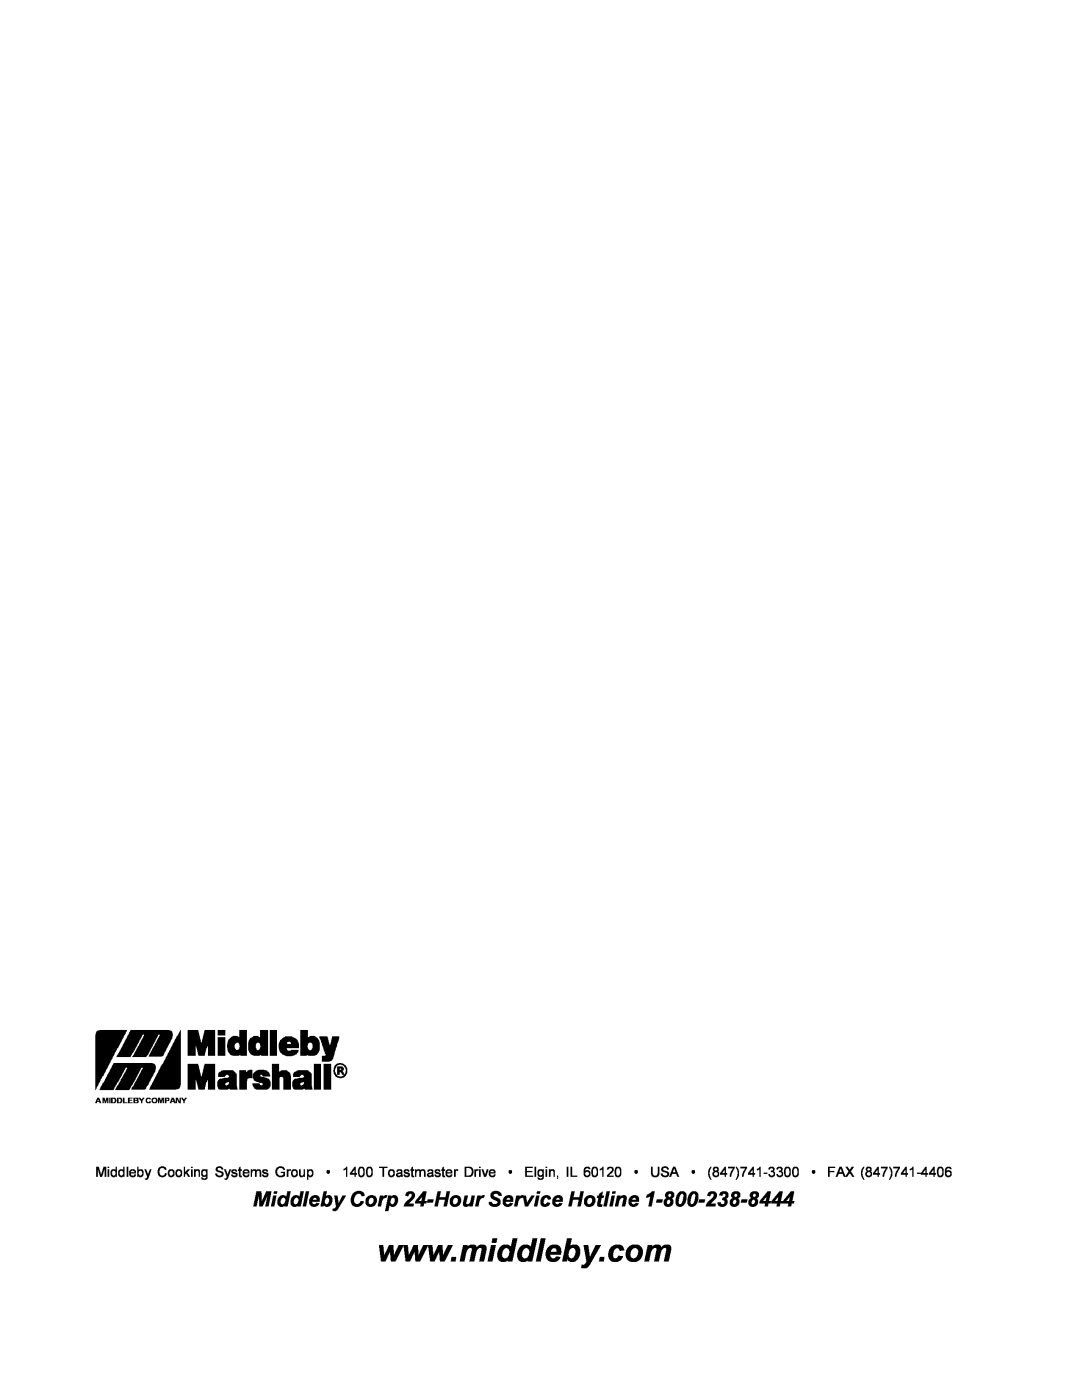 Middleby Marshall PS360WB installation manual Middleby Corp 24-Hour Service Hotline, A Middleby Company 